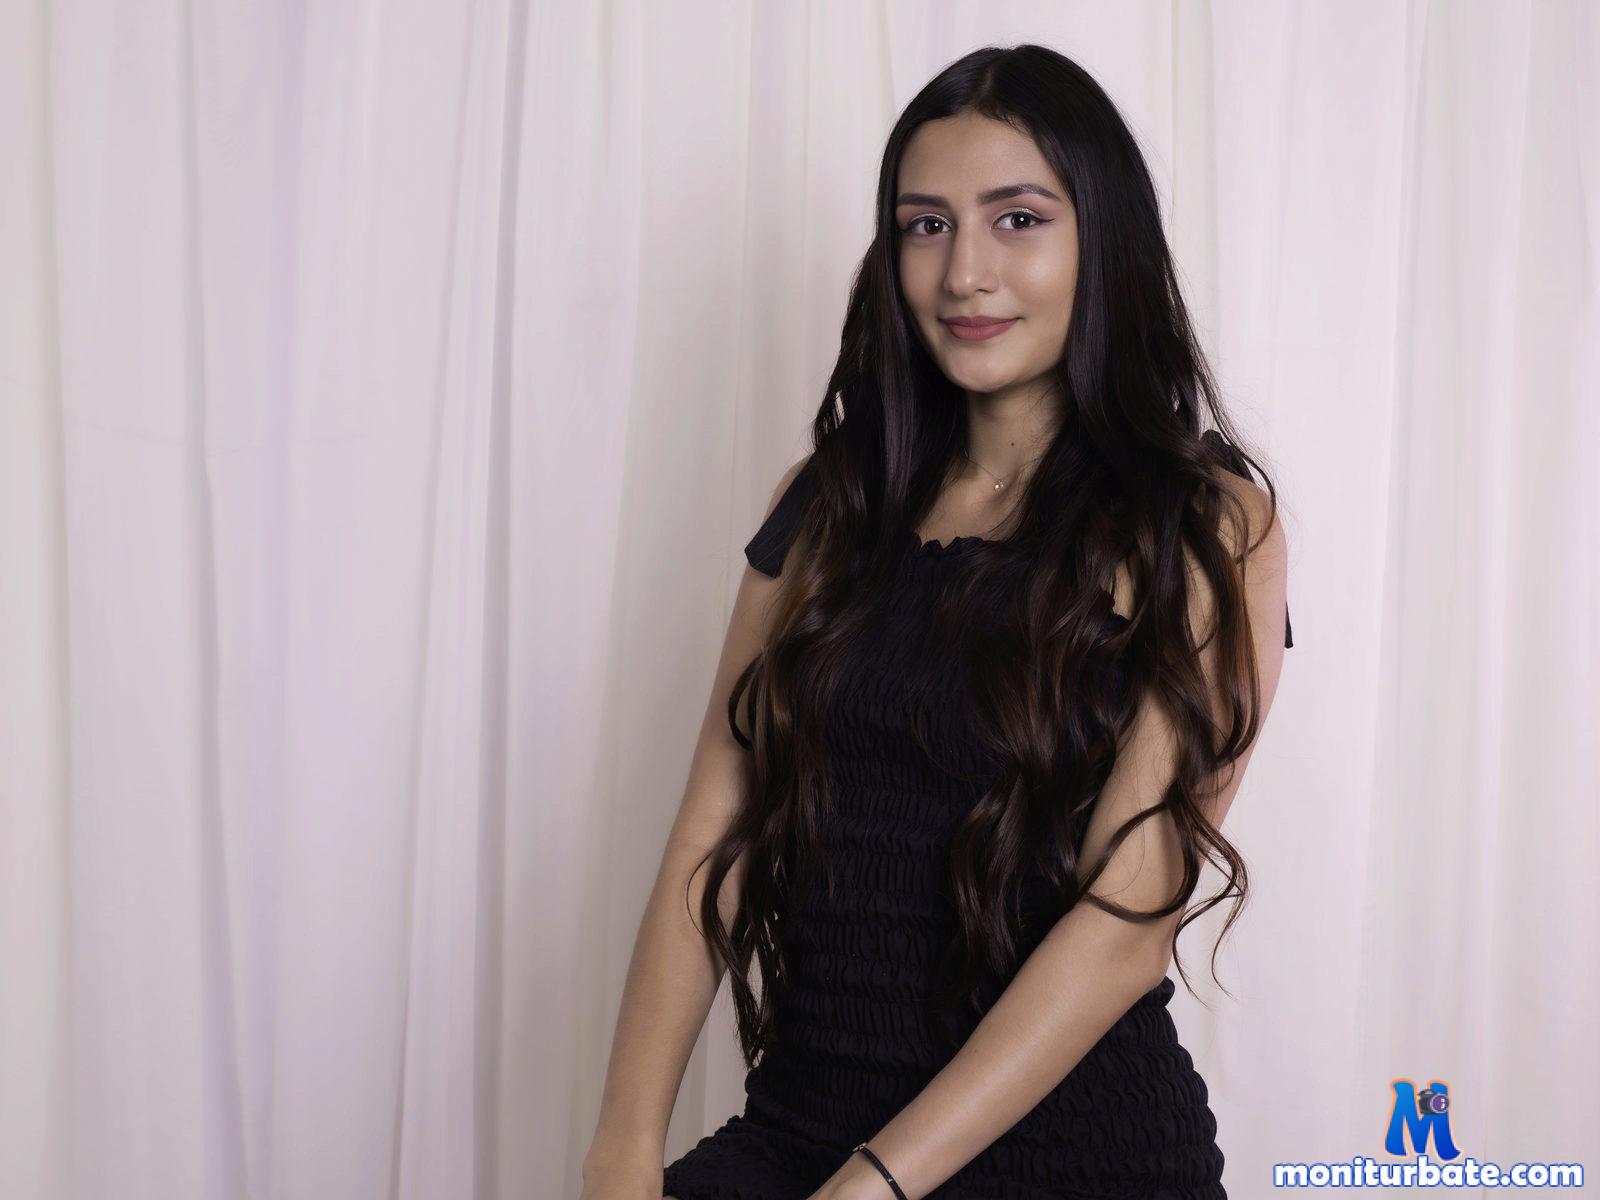 Jessy Russells Flirt4free Performer Details She Likes To Anal As Well 